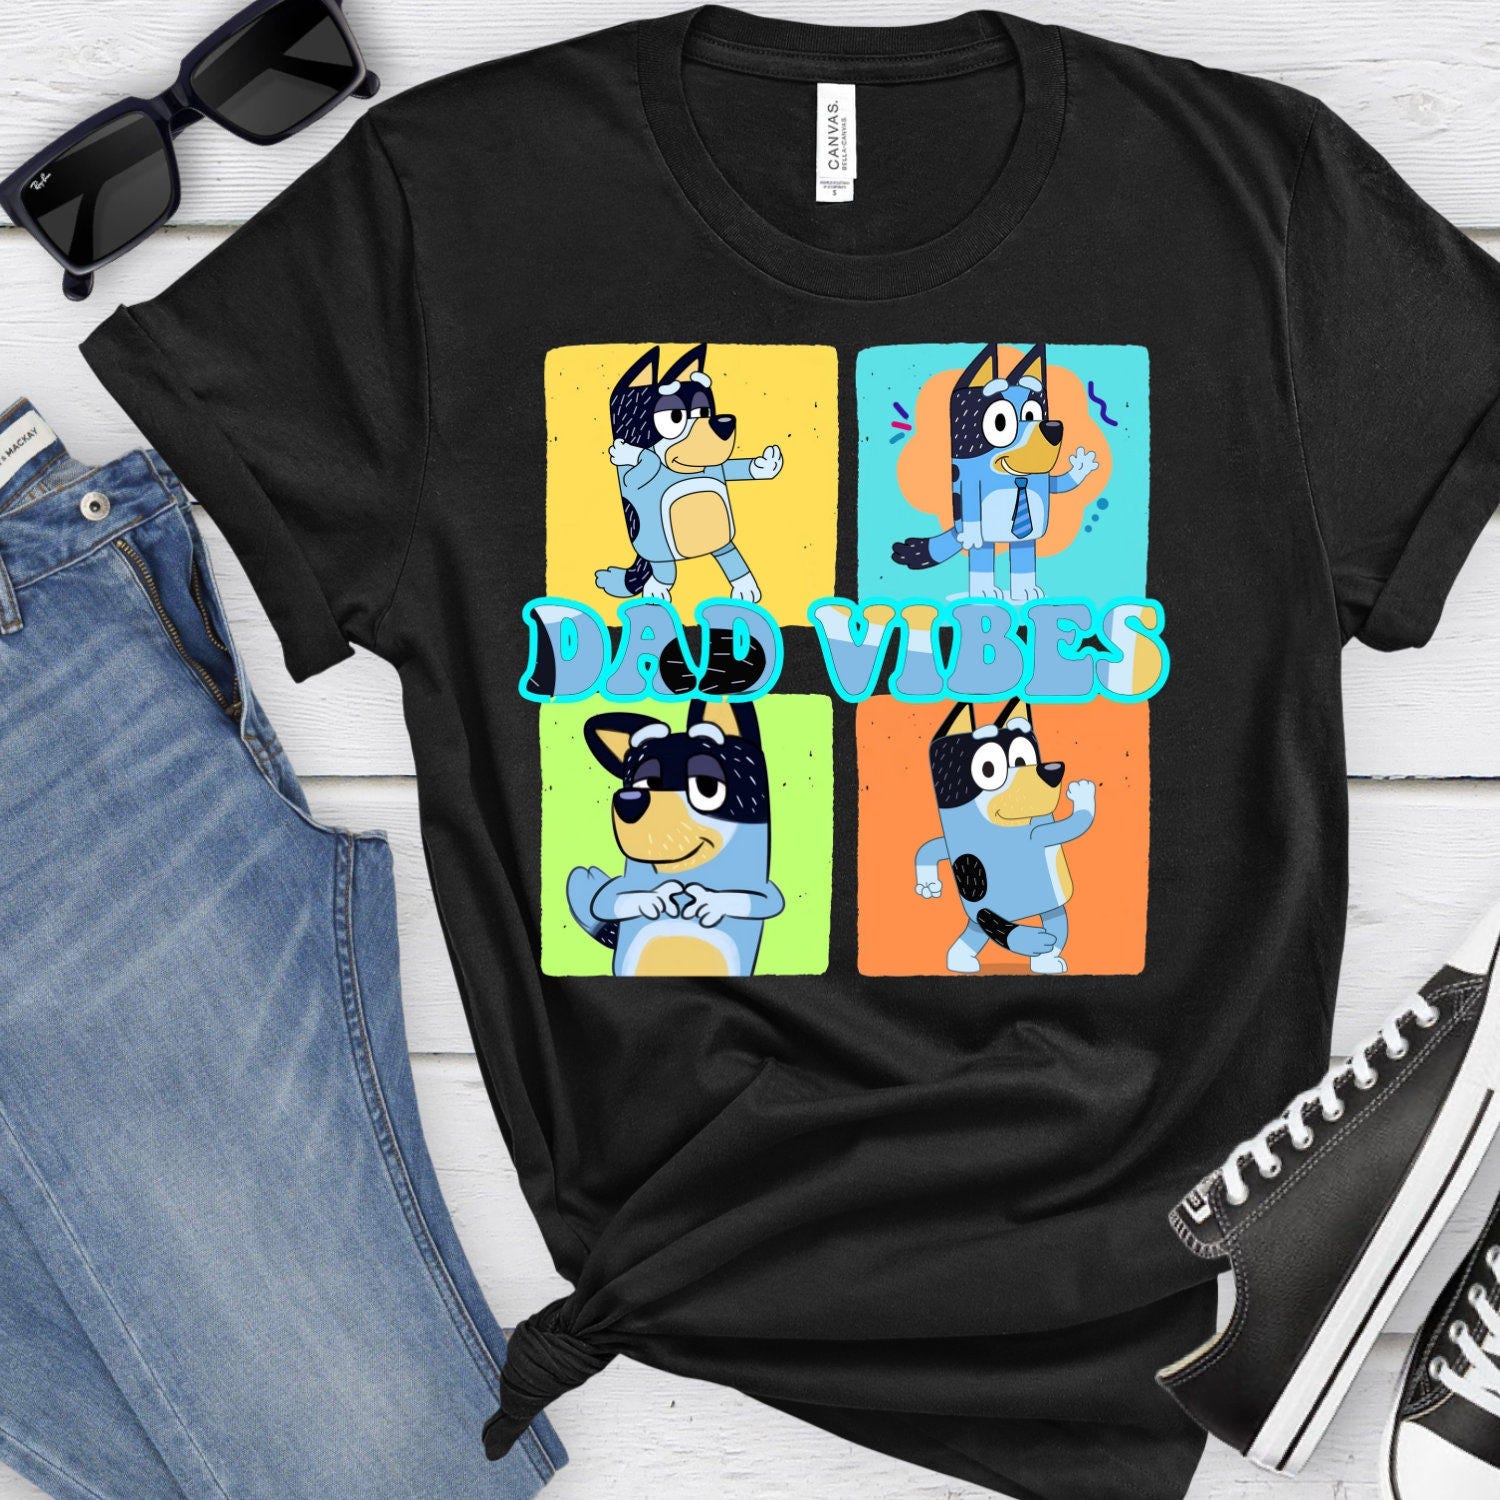 Cool Dad Vibes Cartoon Tee - Funny Father